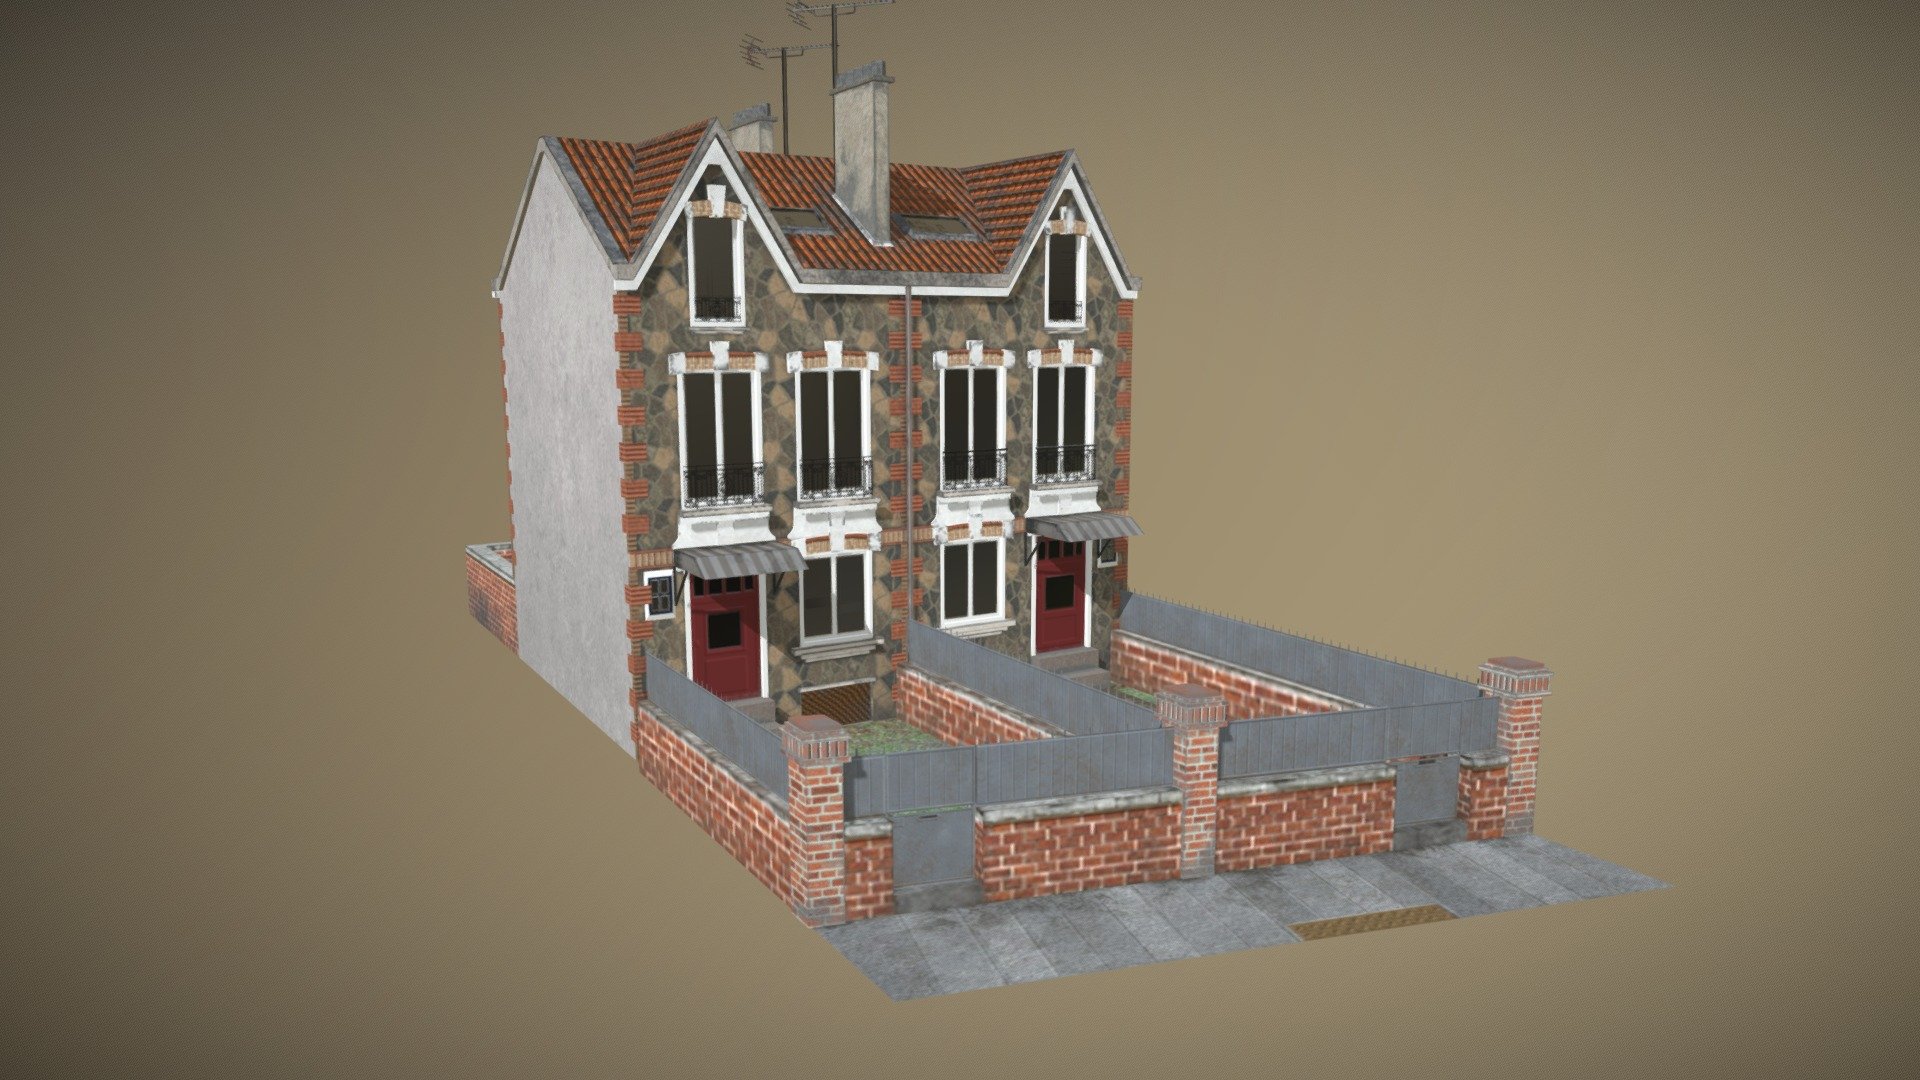 French houses are taken from buildings in the real world.

follow my Artstation Account https://kyyy_ndr.artstation.com/
follow my sktechfab Account sketchfab.com/luckyardrianto27
follow my artwork instagram https://www.instagram.com/laart851/ - french house - 3D model by Kyyy_24 (@luckyardrianto27) 3d model